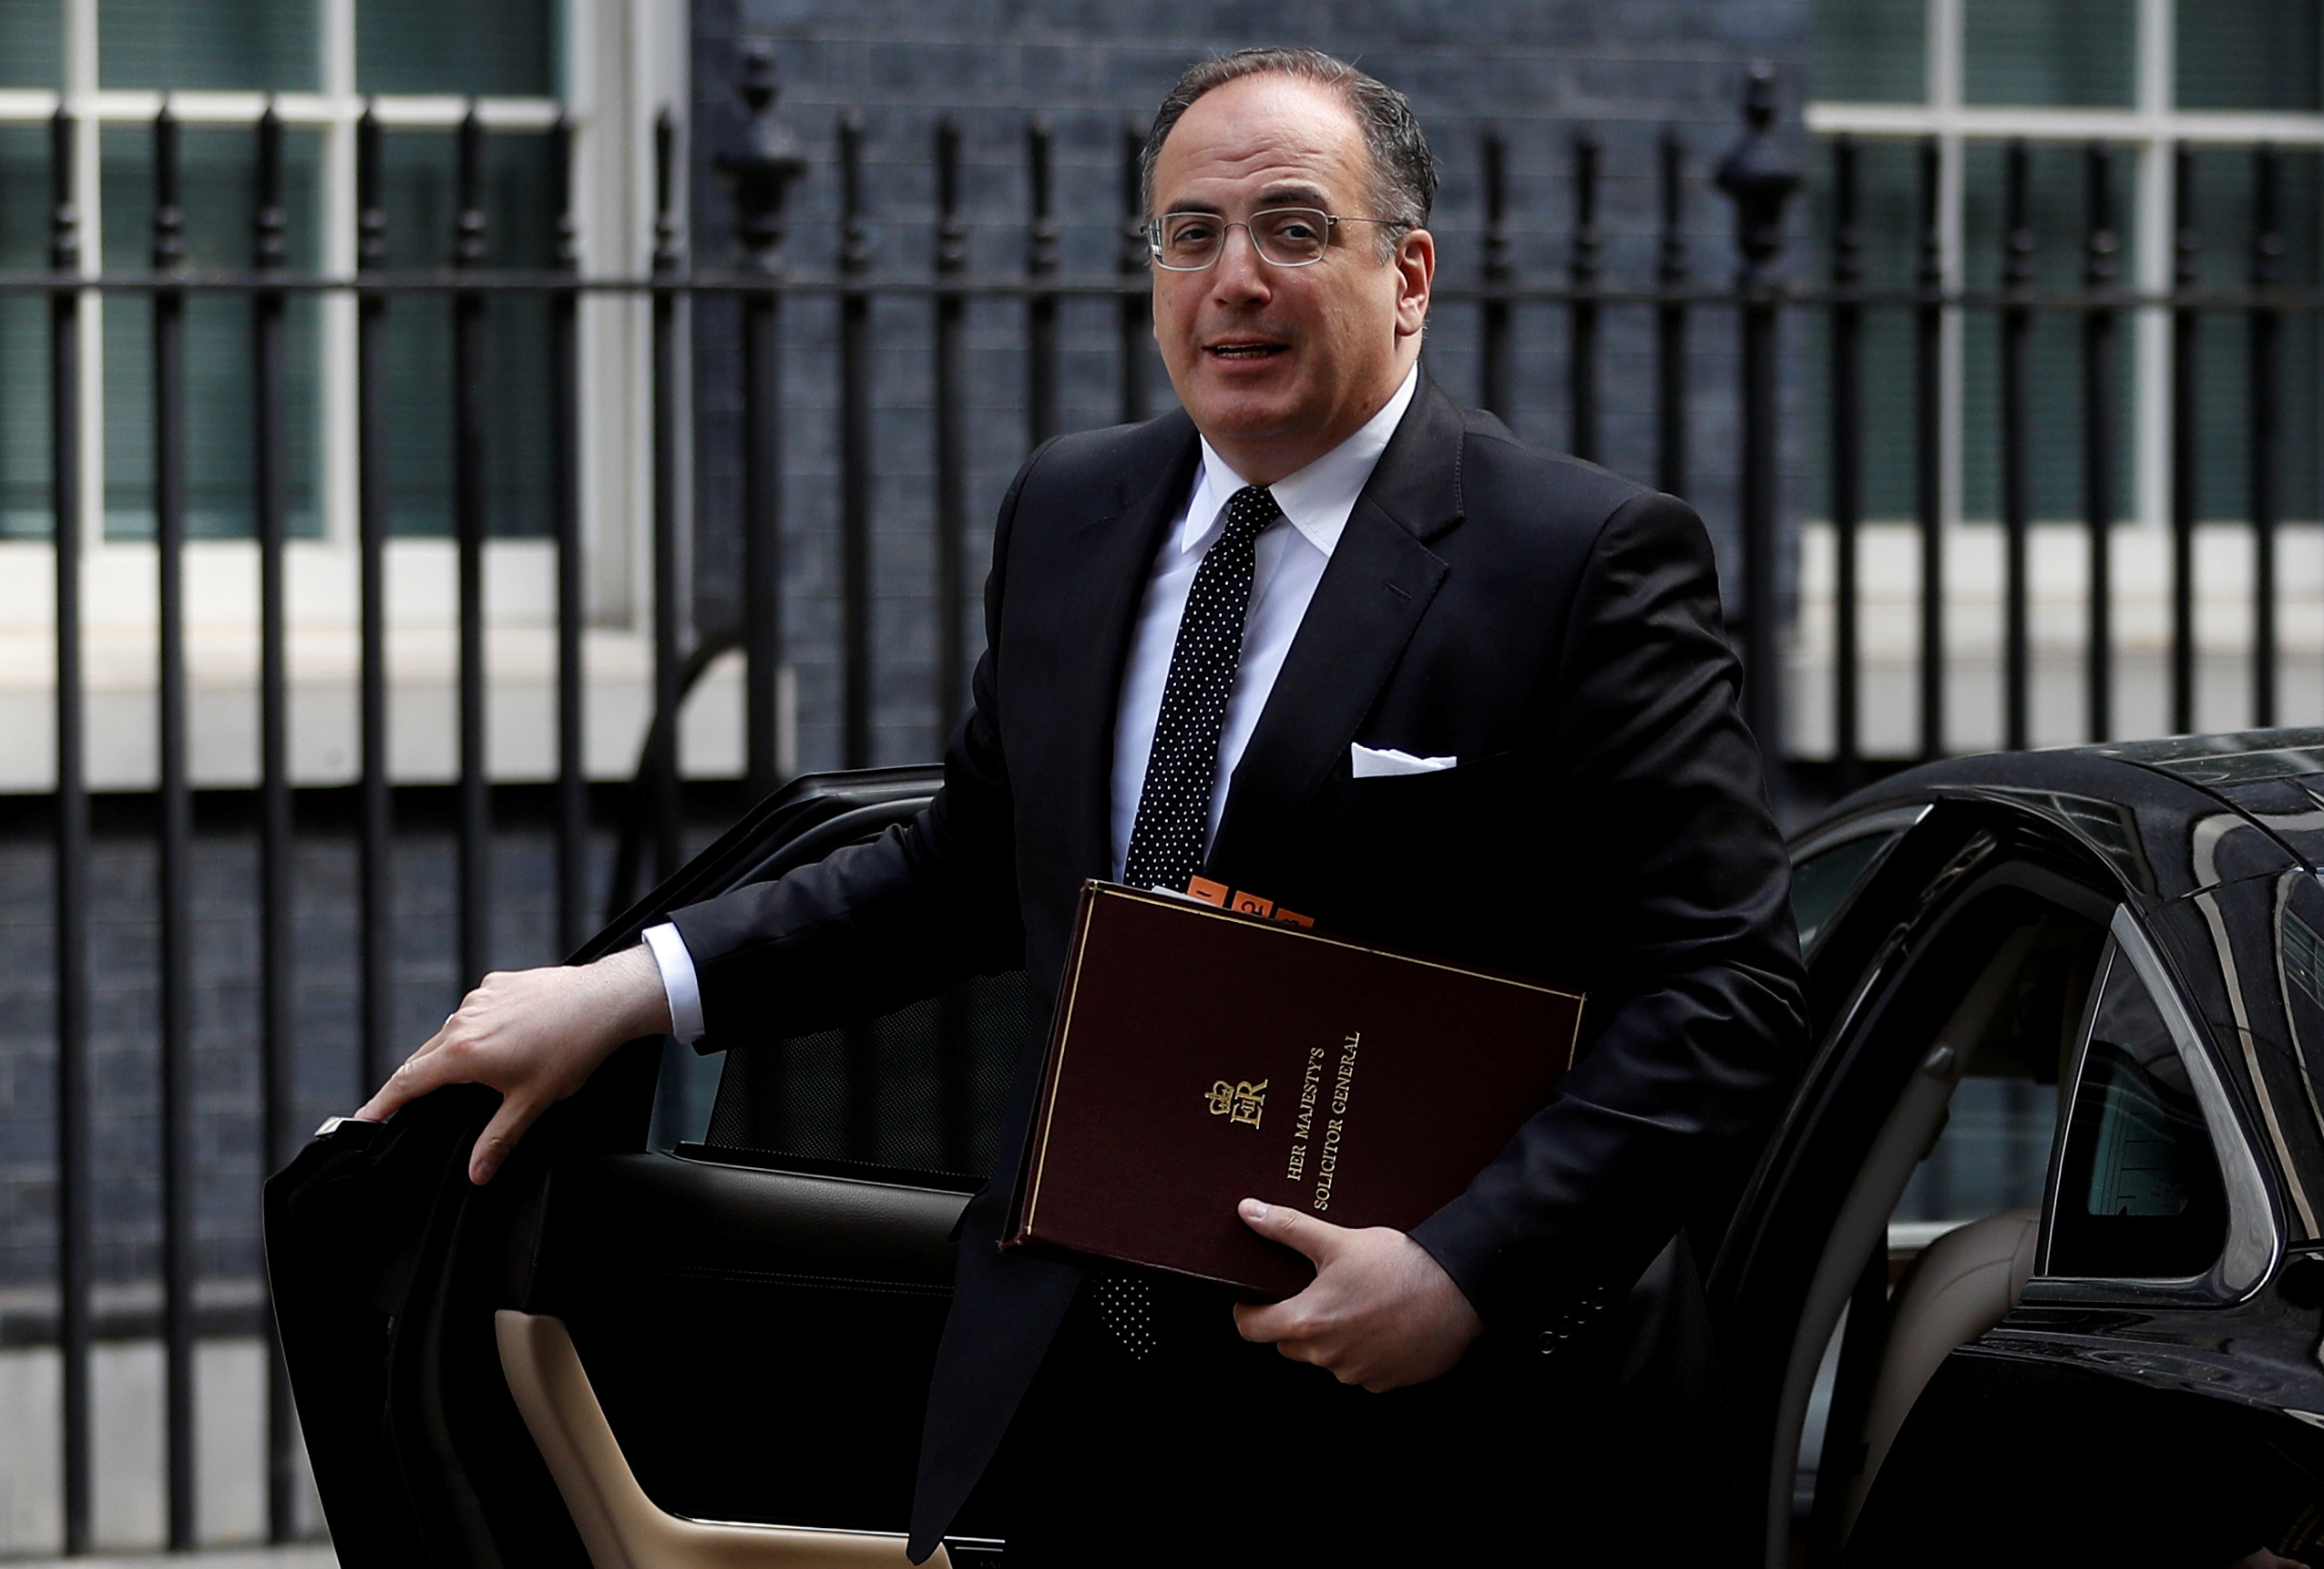 UK lawmaker Ellis to be minister for cabinet office - PM's office | Reuters